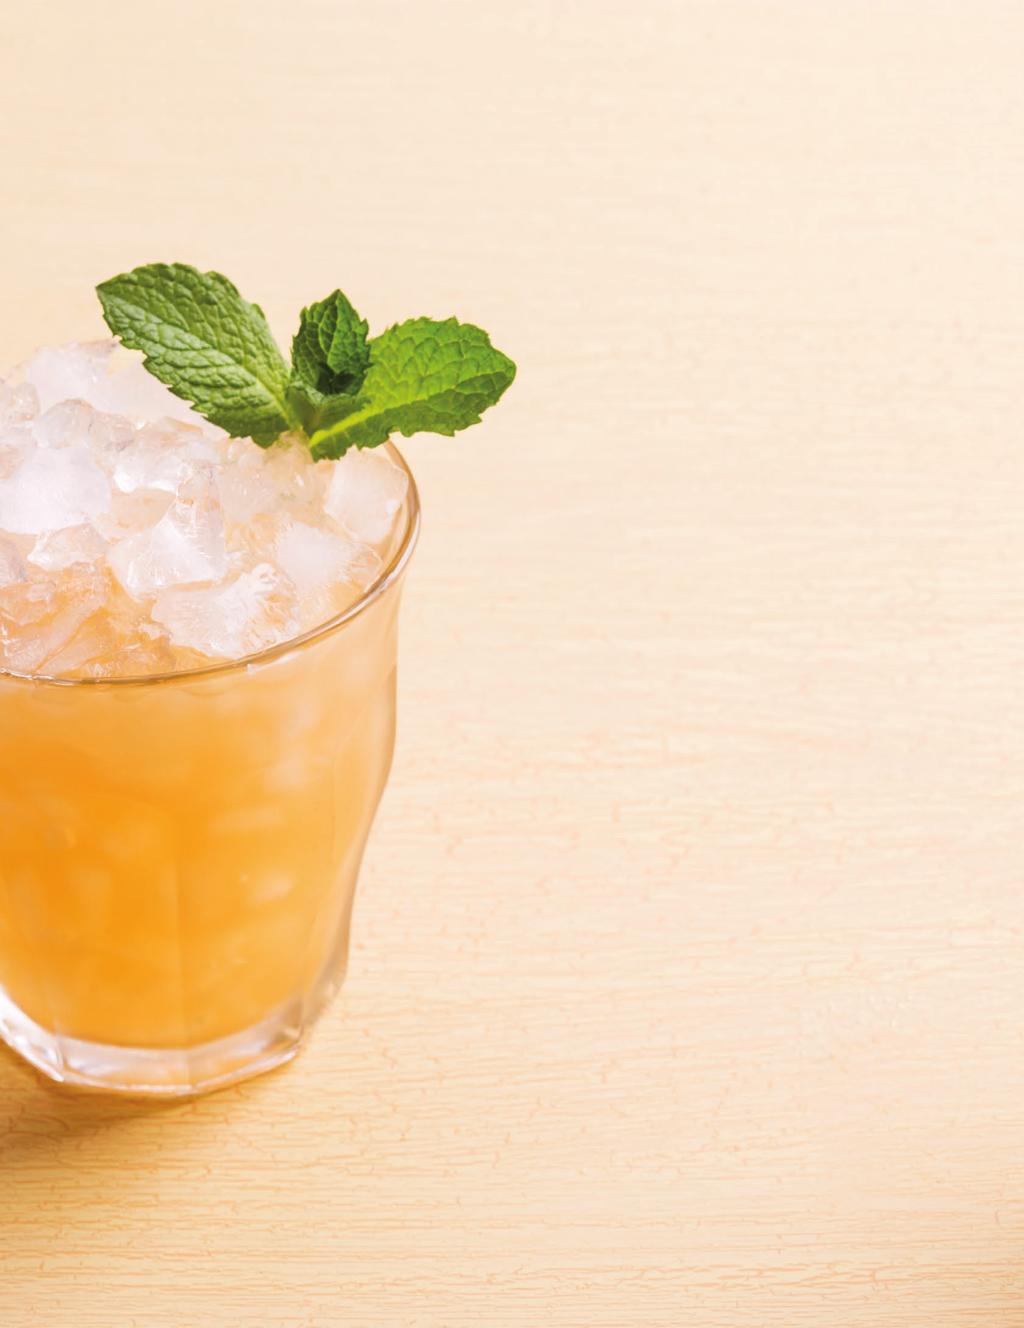 MELO-MINT SMASH Crazy for cantaloupe? So is Boise bartender Michael Bowers, who muddles the summery melon with rhum agricole in this creamsicle-hued smash.